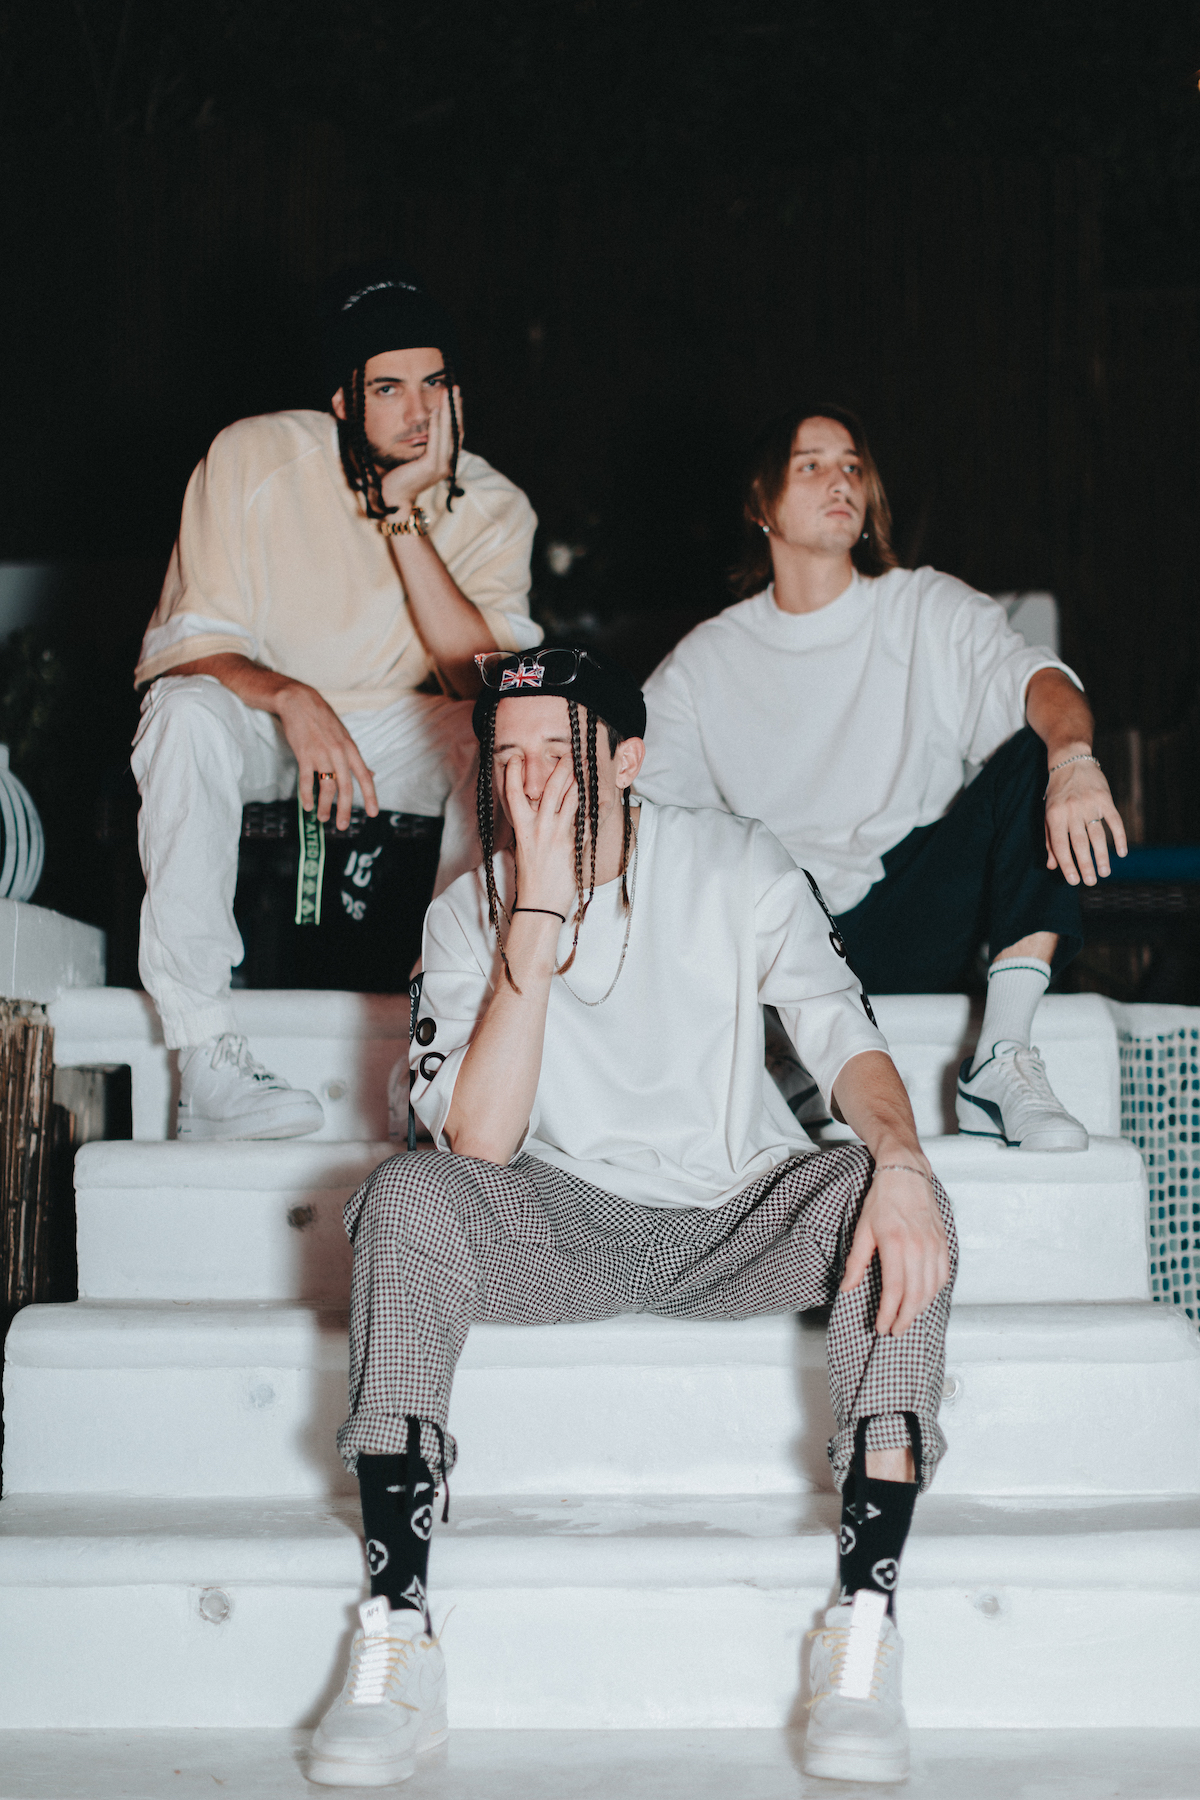 CHASE ATLANTIC // Drop New Single 'Out The Roof', Sign With Fearless ...